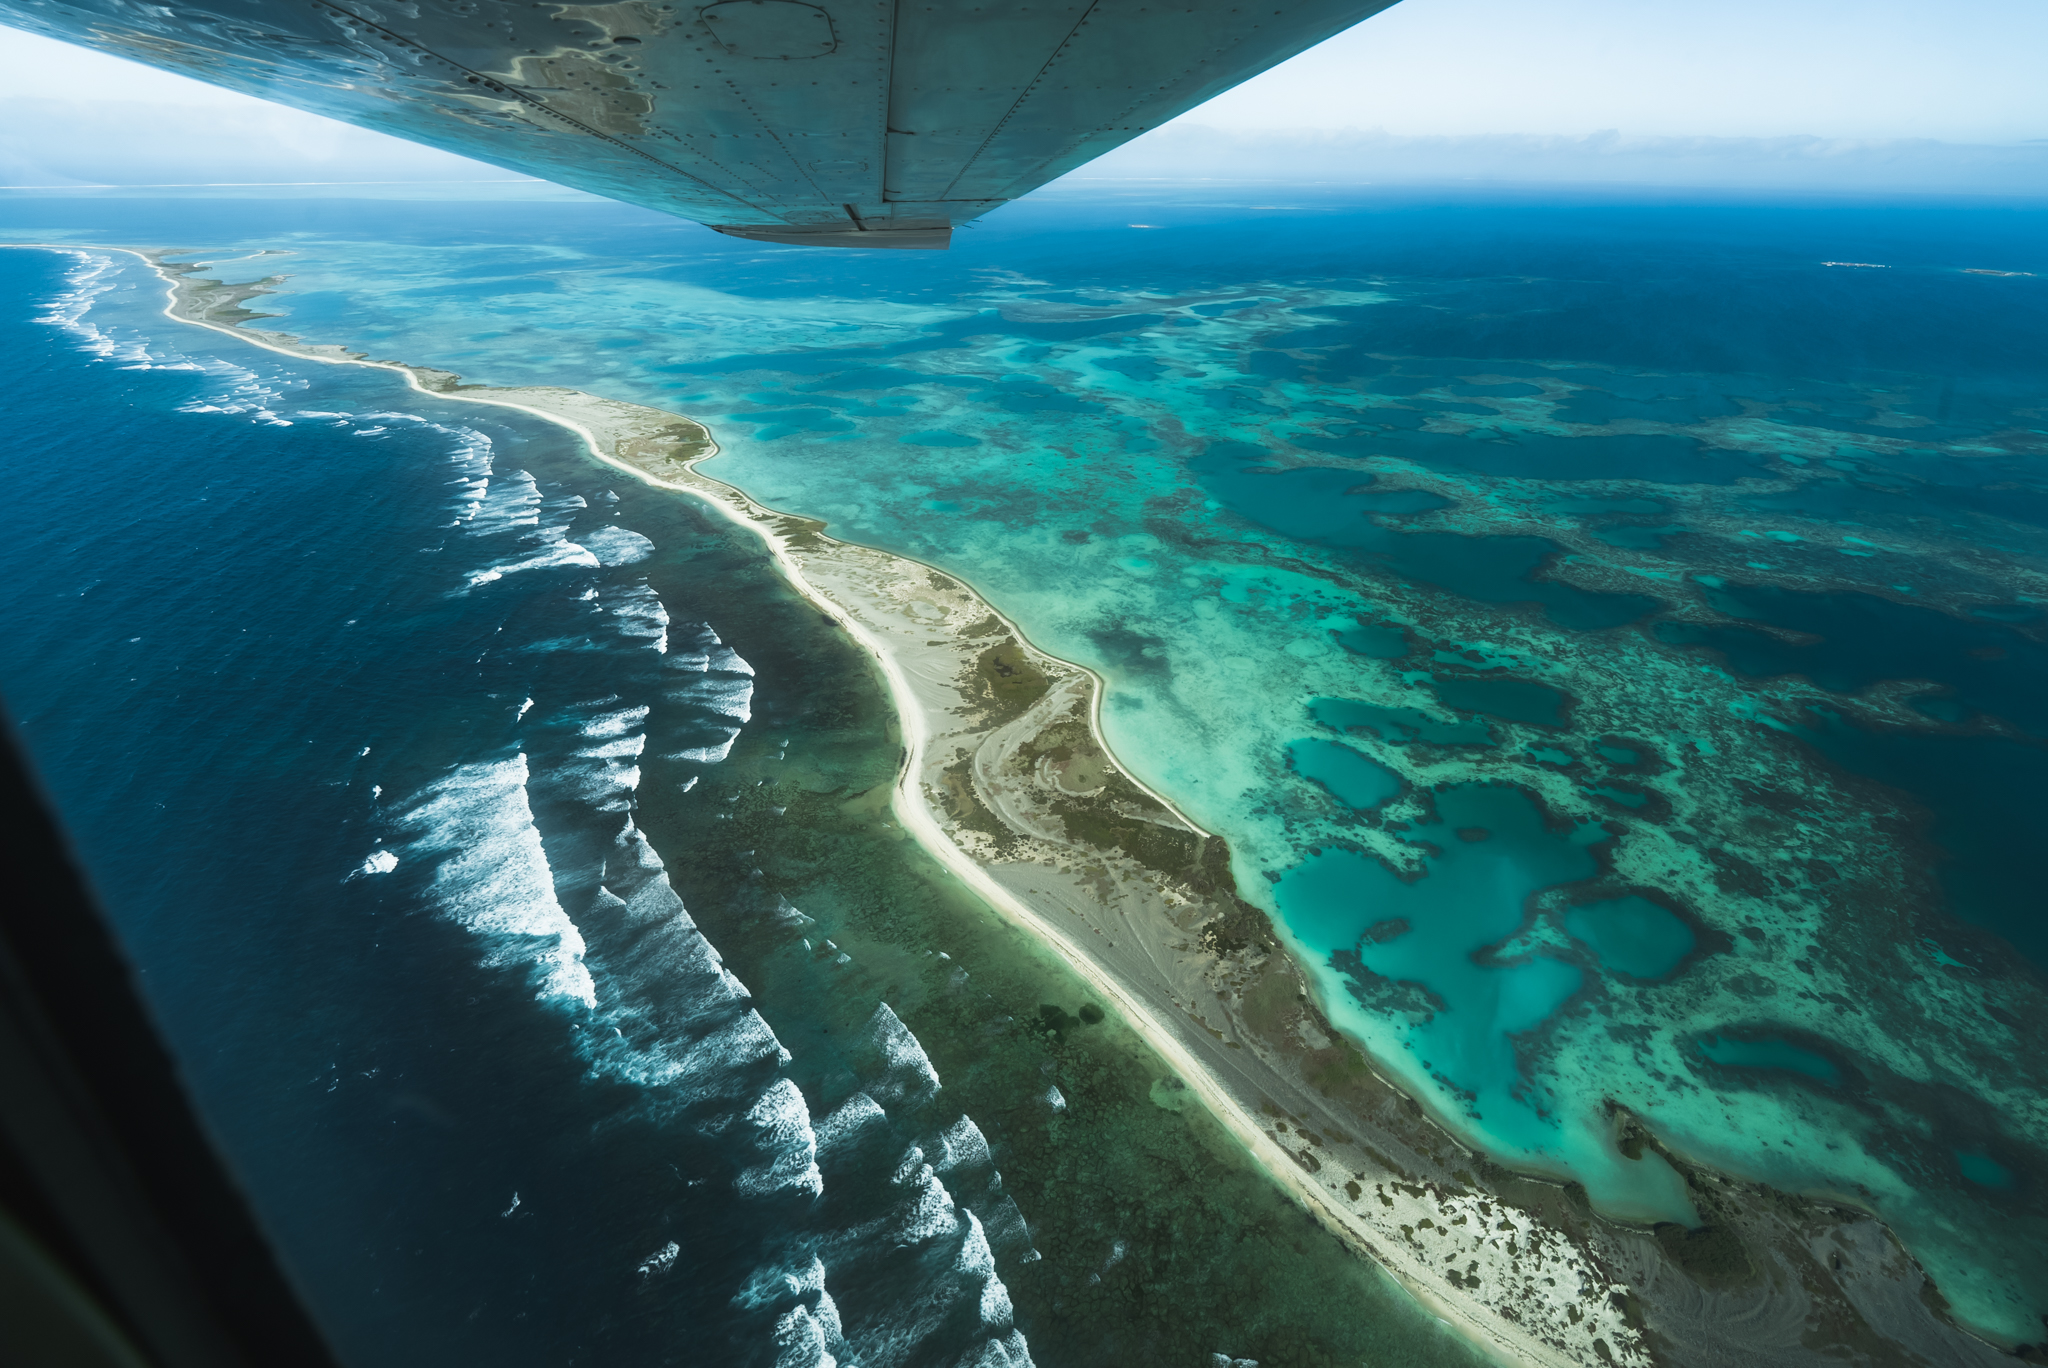 Escape to the Abrolhos Islands - Half Day Tour